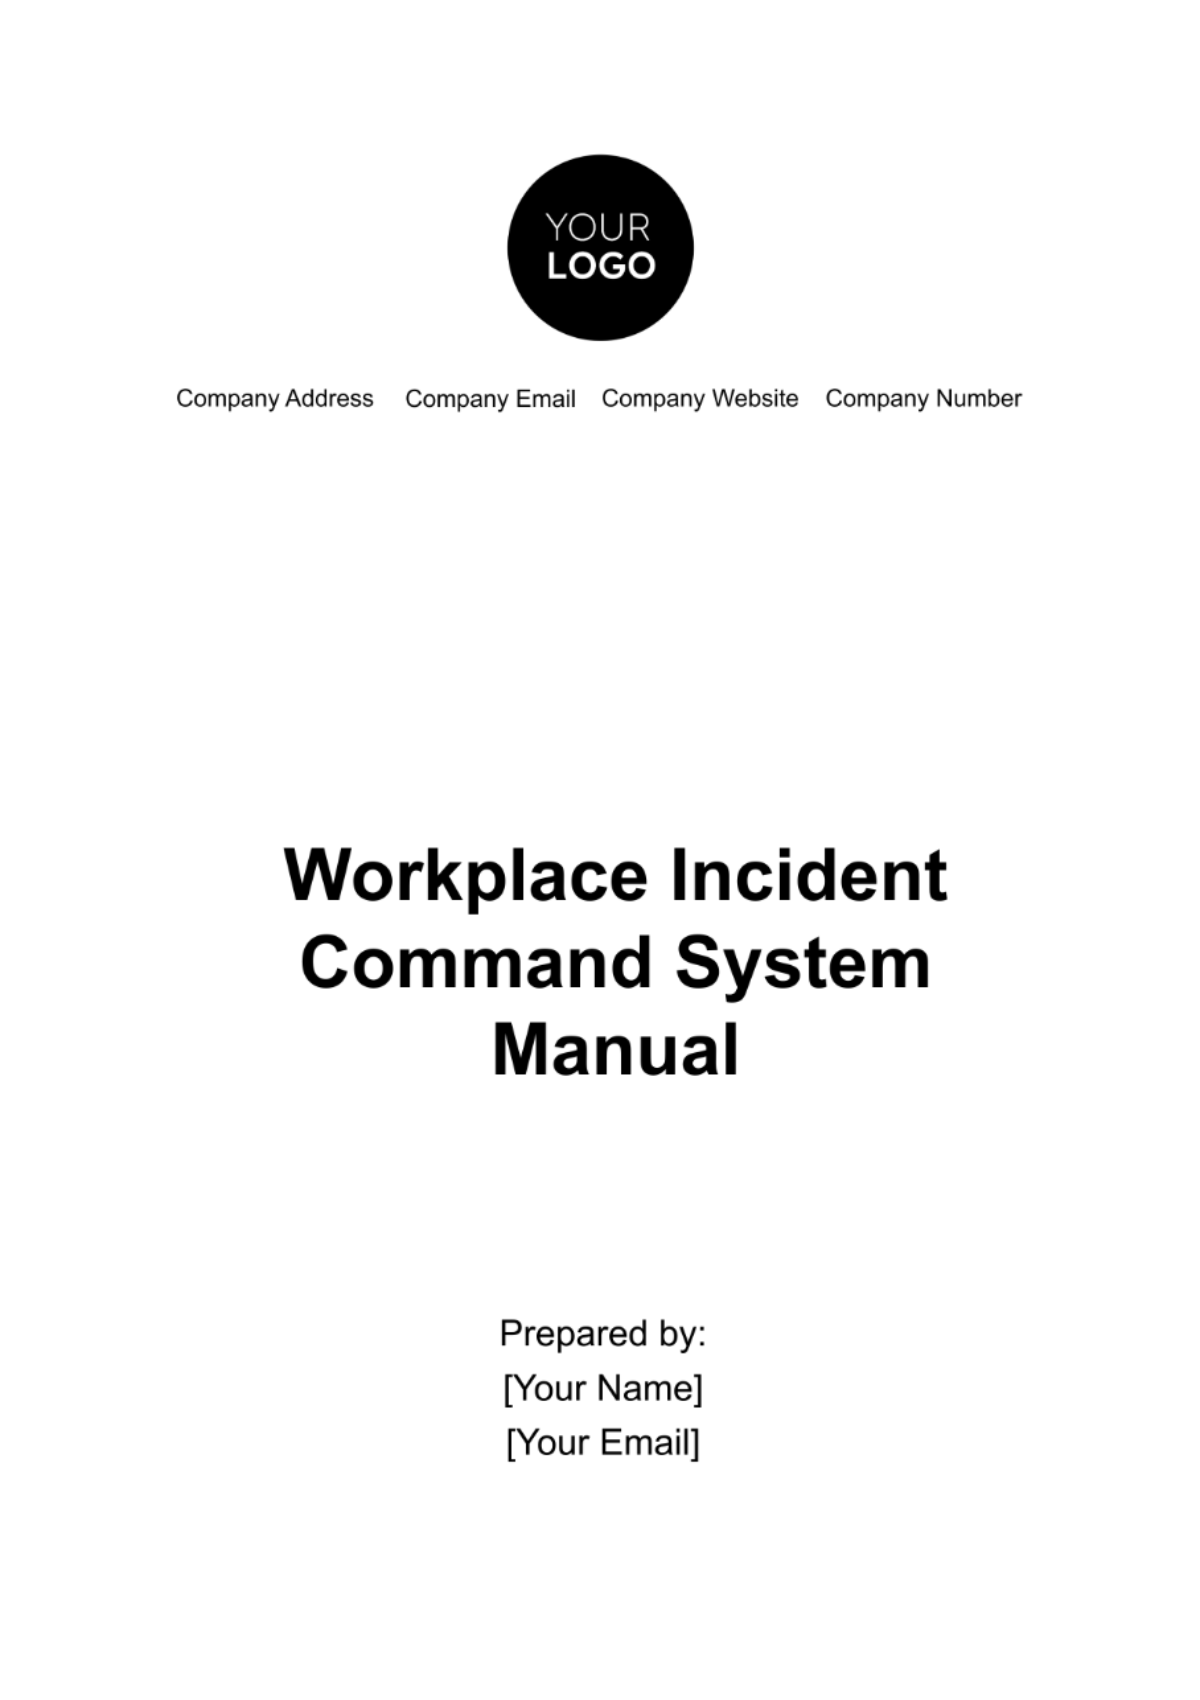 Workplace Incident Command System Manual Template